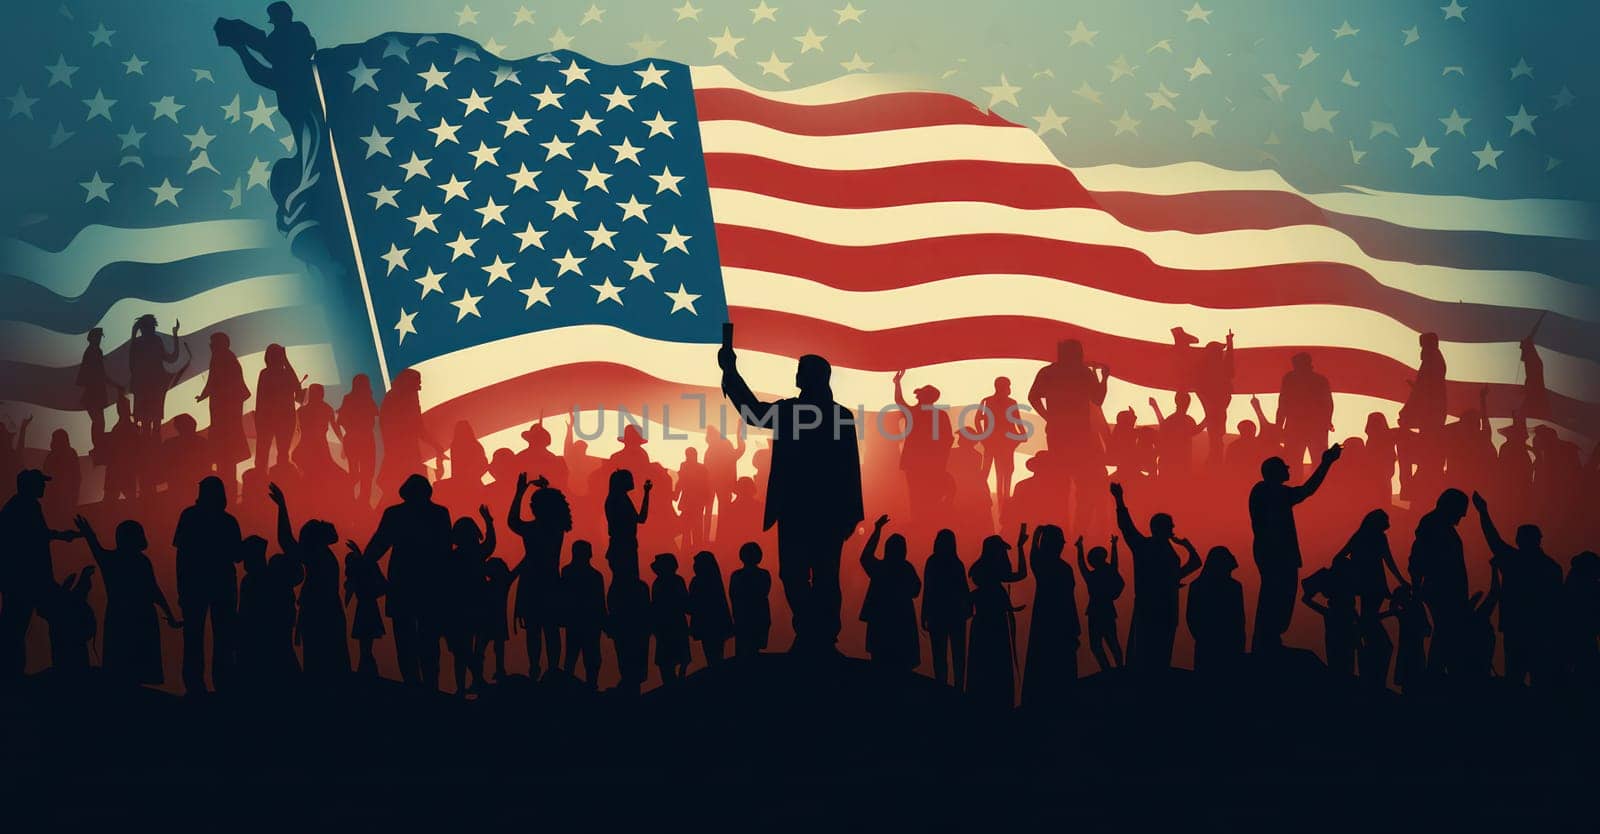 Patriotic Celebration: American Flag Silhouette Salute in the United States